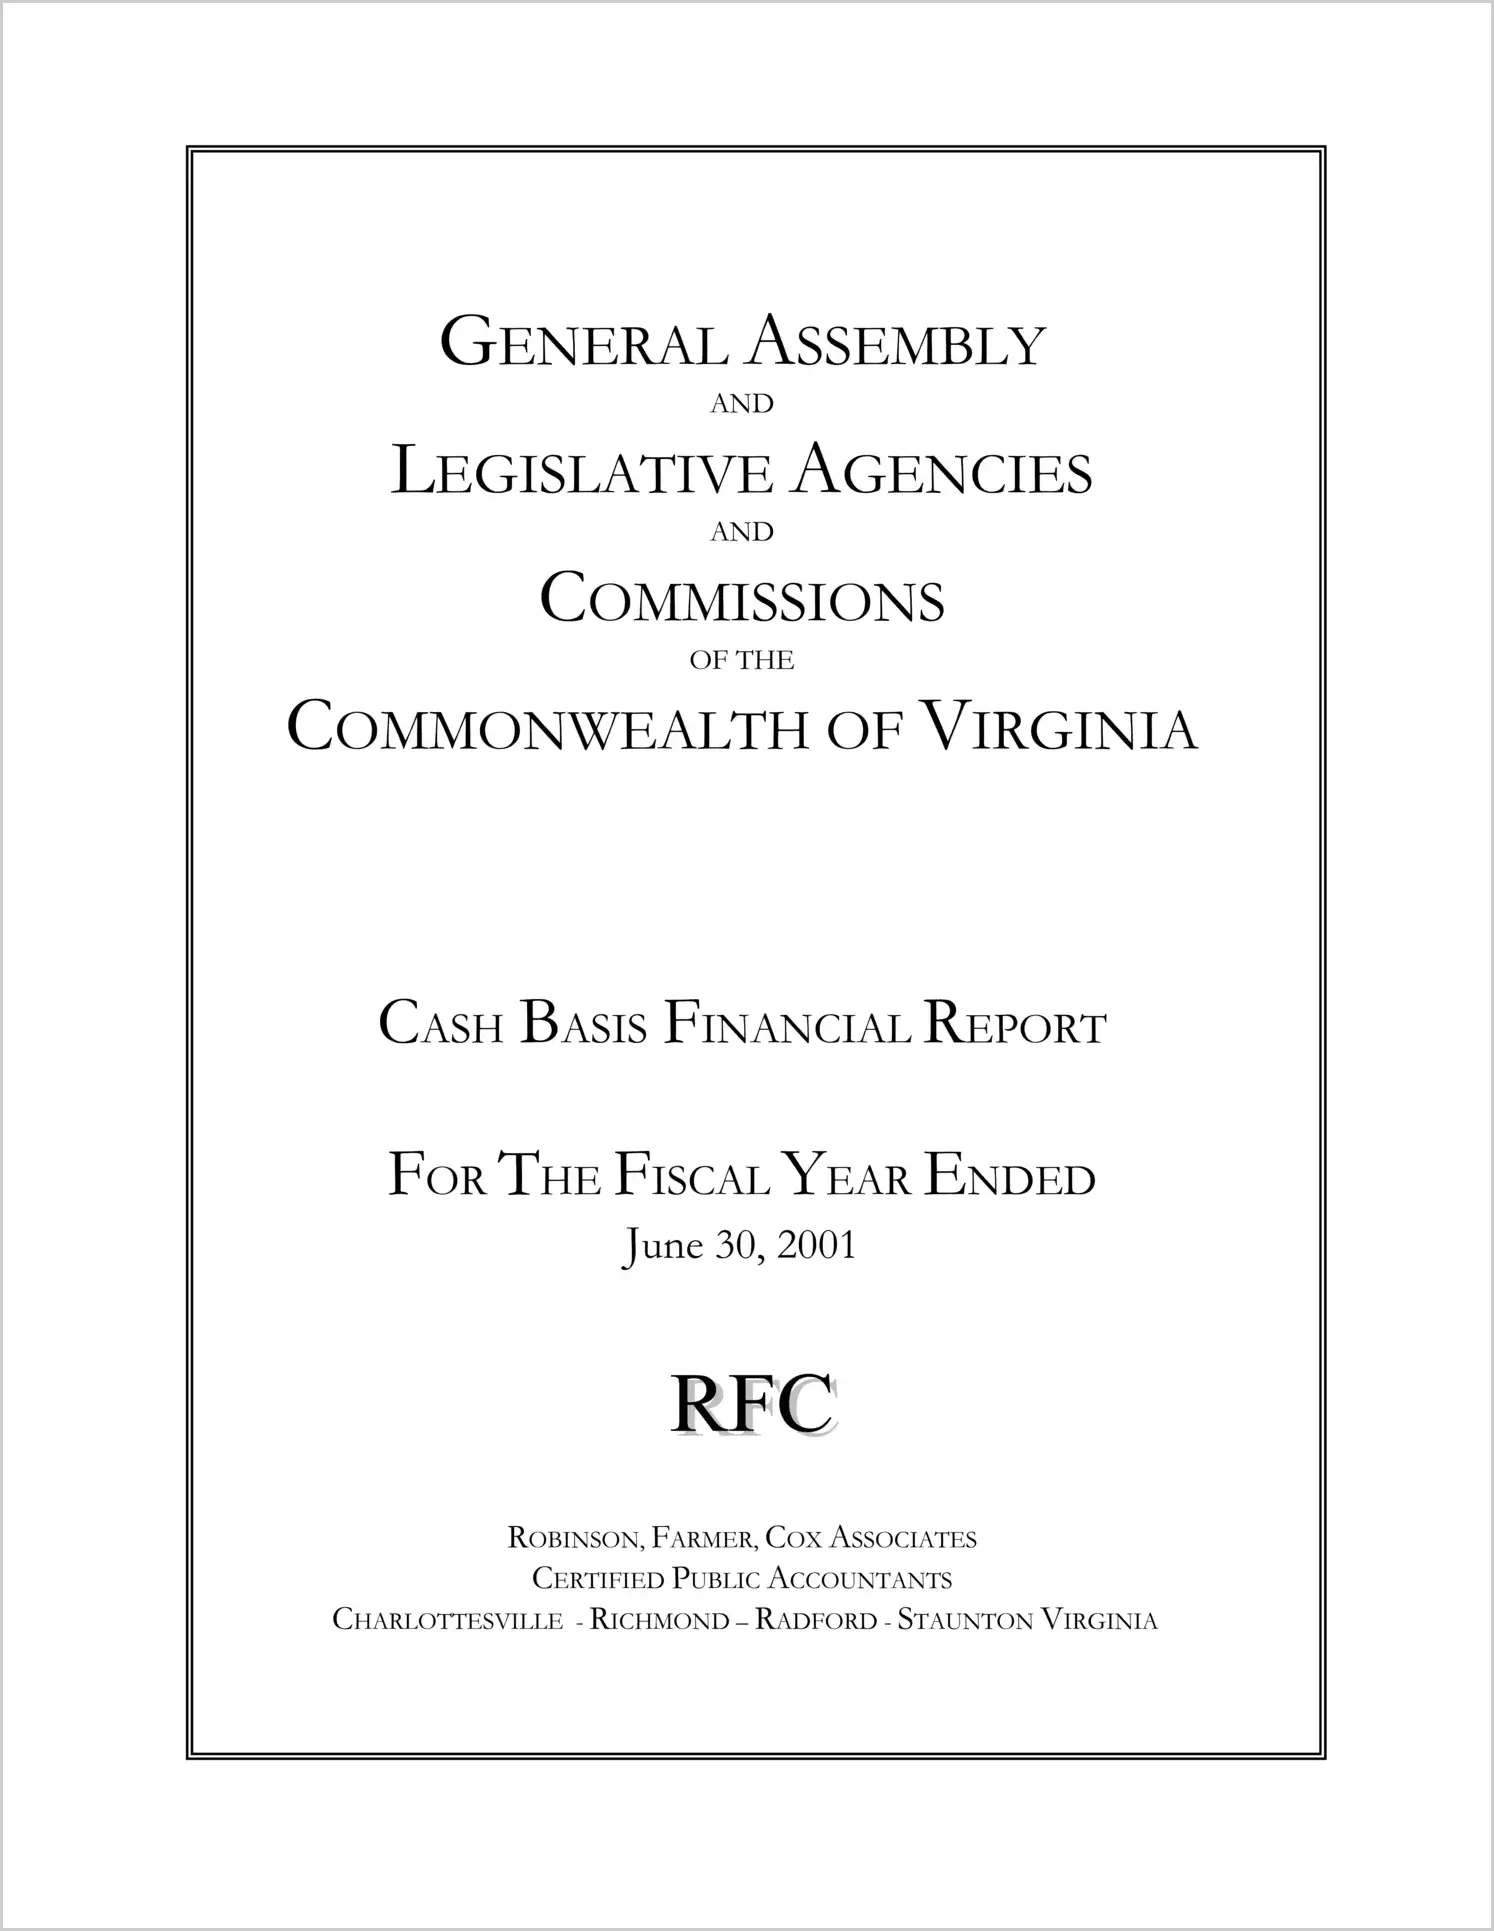 General Assembly and Legislative Agencies and Commissions of the Commonwealth of Virginia Cash Basis Financial Report For The Fiscal Year ended June 30, 2001